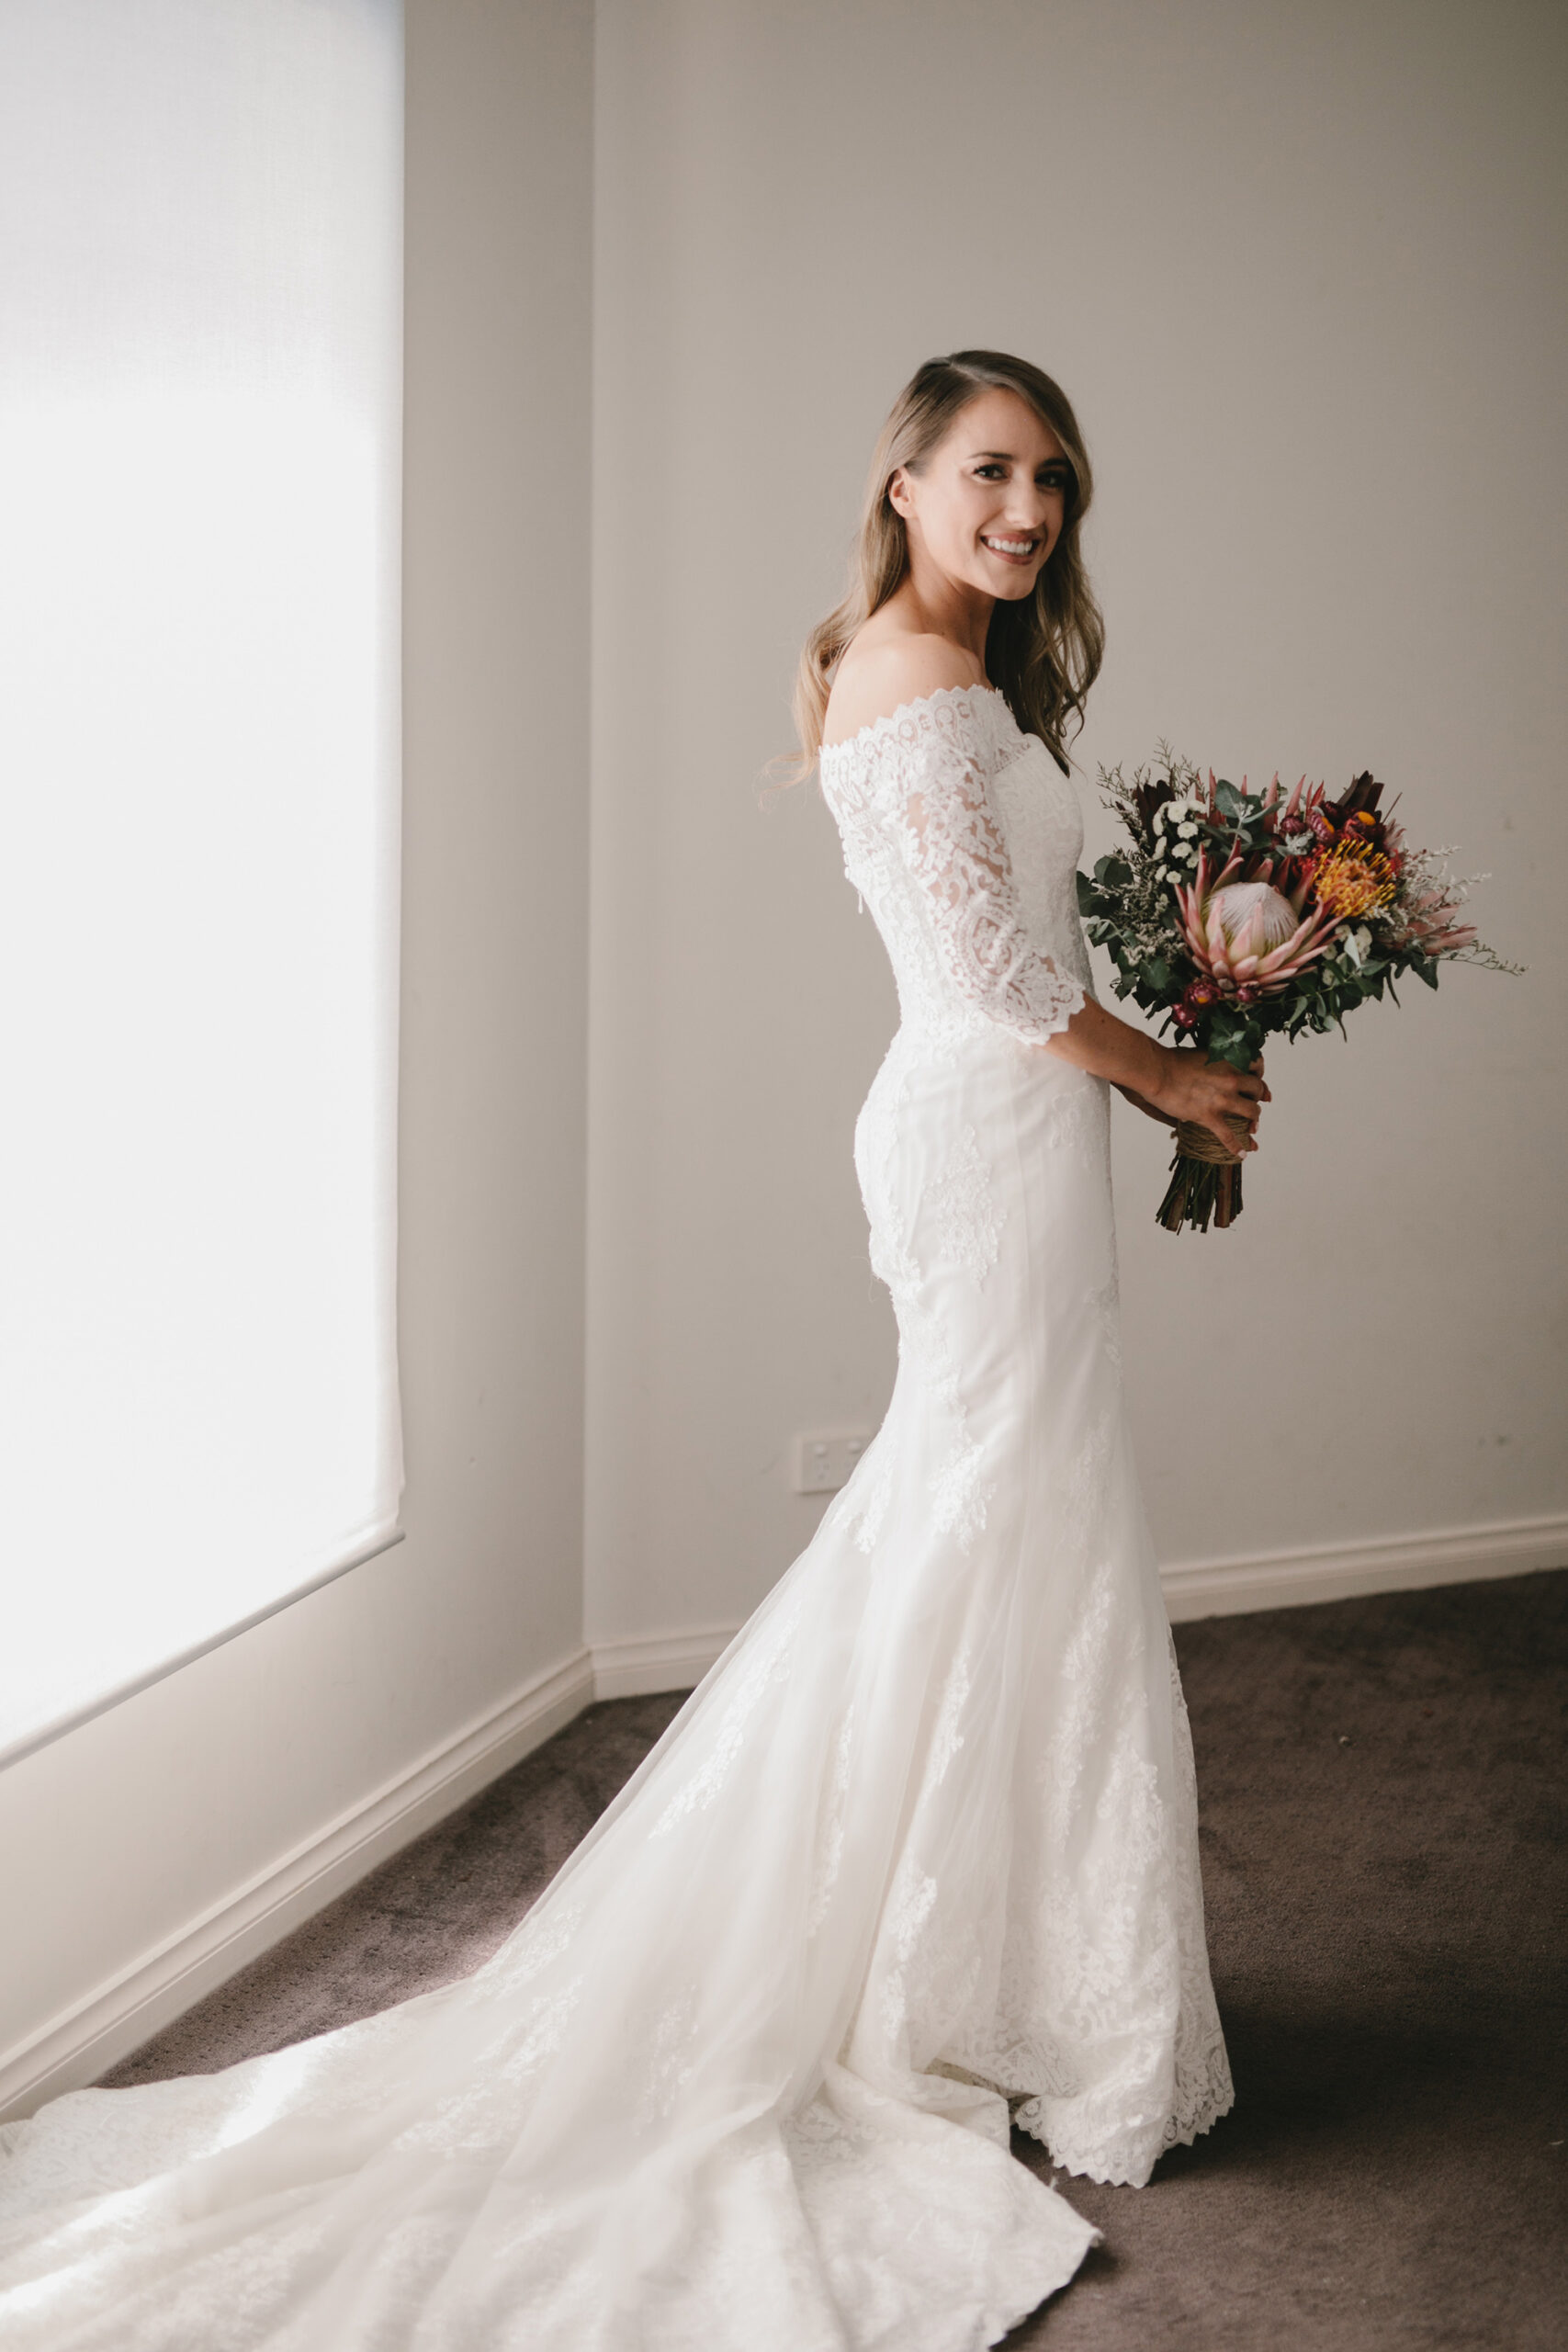 Katie Andrew Rustic Contemporary Wedding DUUET 007 scaled